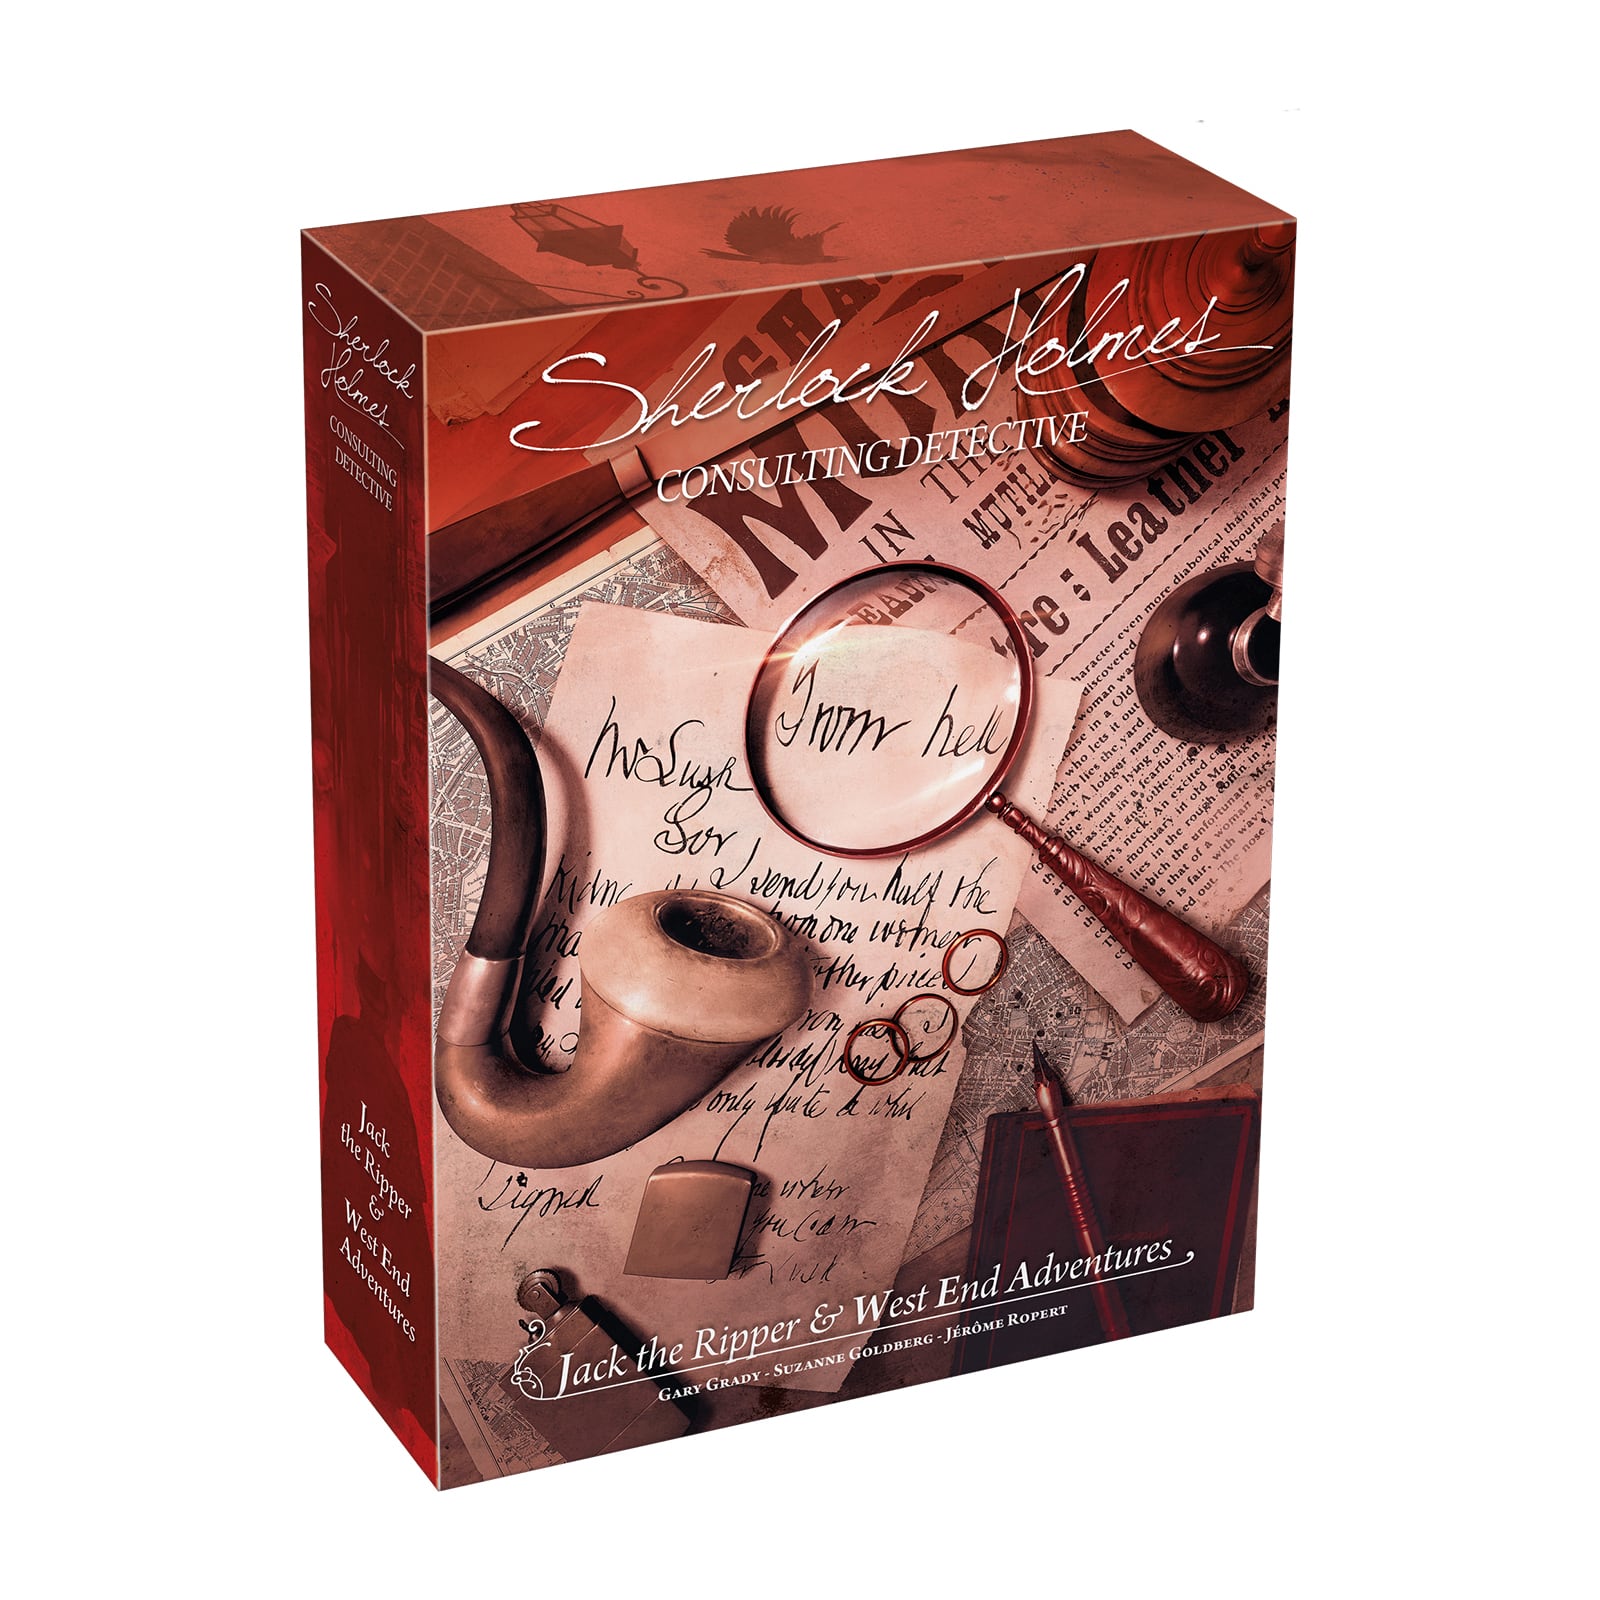 Sherlock Holmes Consulting Detective: Jack the Ripper &#x26; West End Adventures